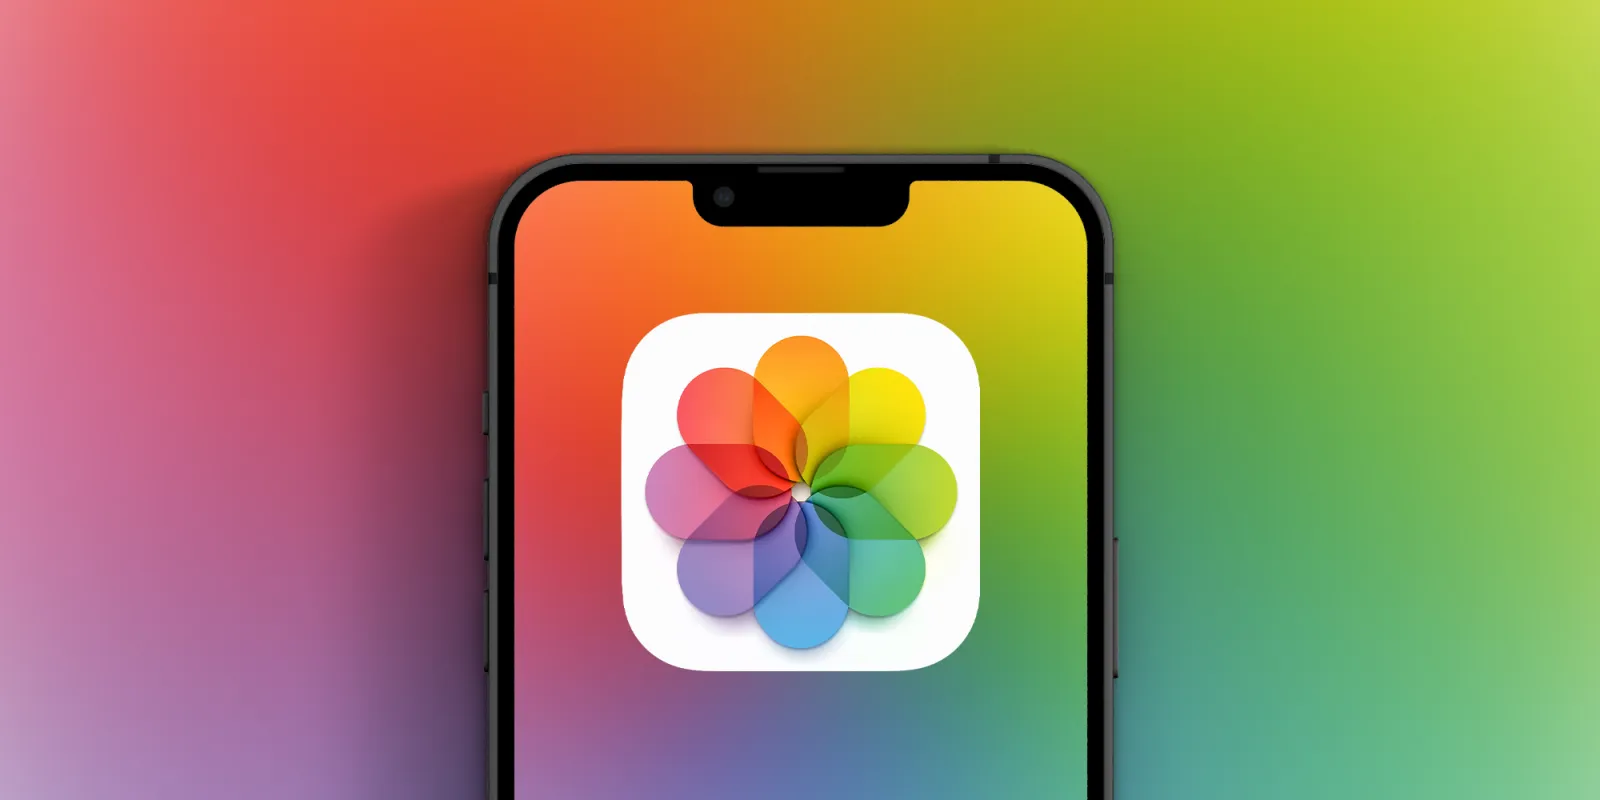 Why Did Deleted Photos Suddenly Reappear on iPhones? Apple Explains the Mystery Behind iOS Glitch